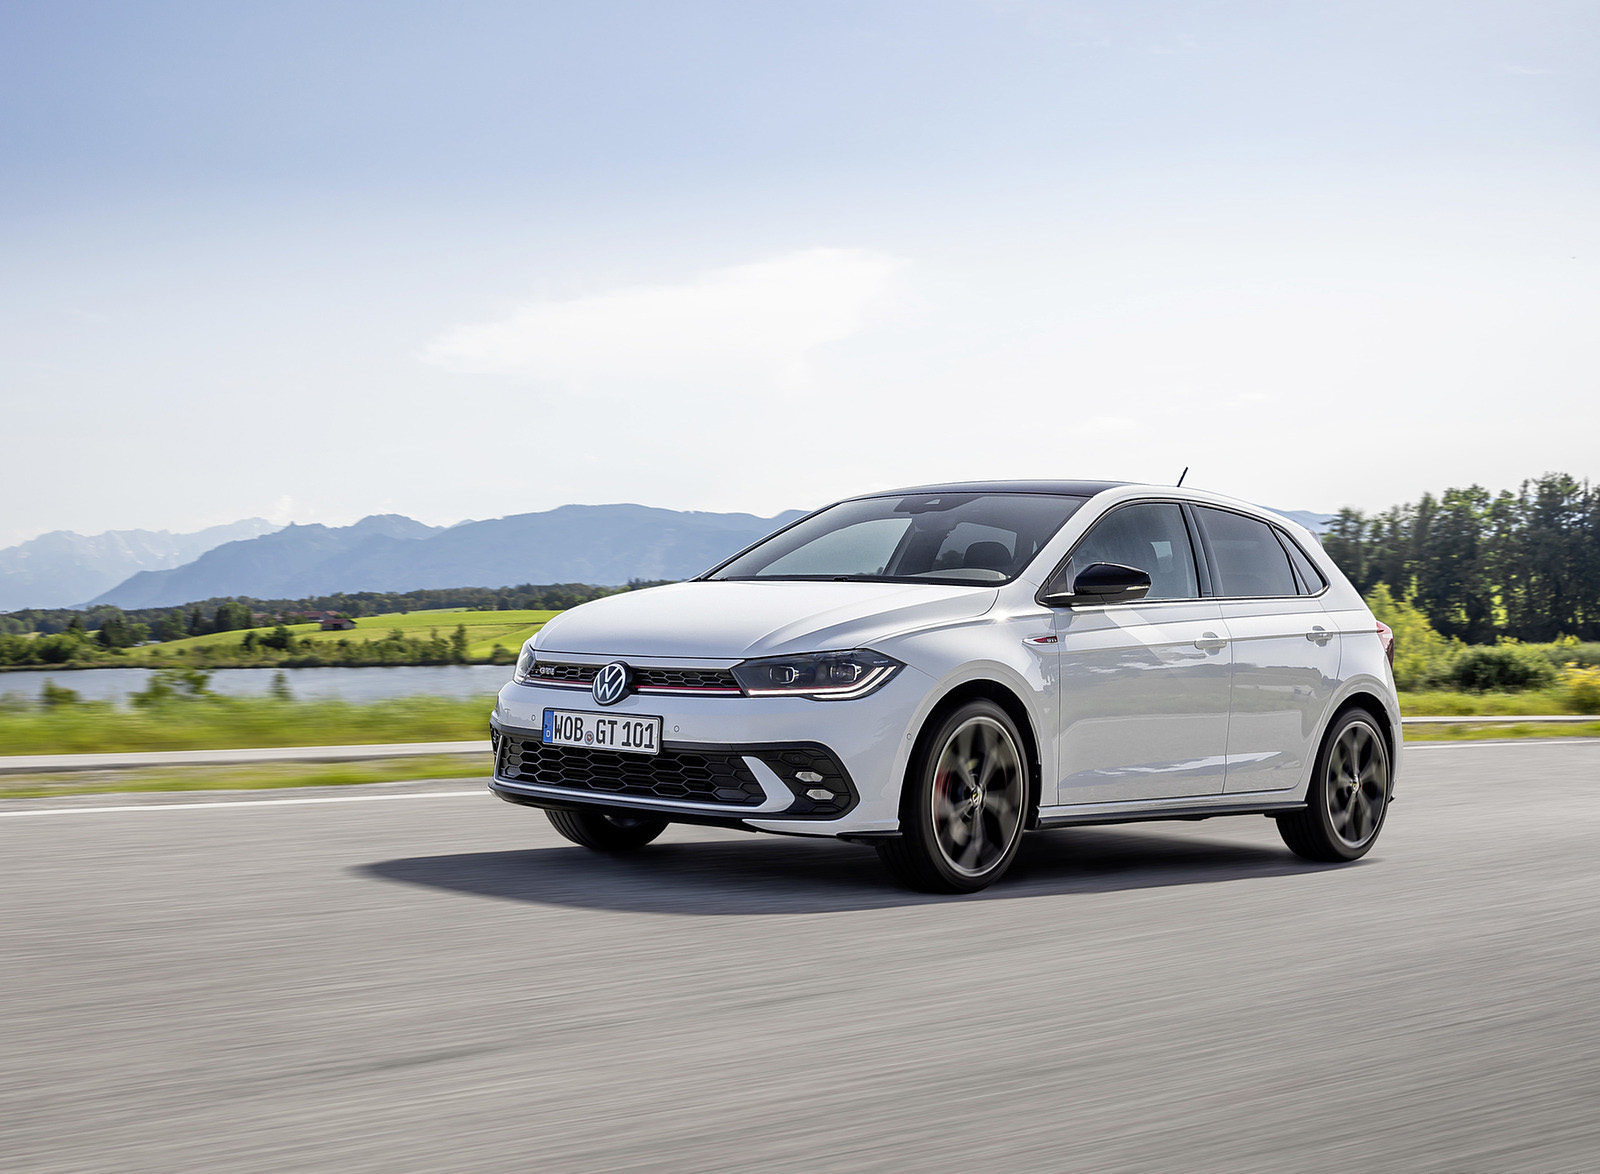 2022 Volkswagen Polo GTI Wallpapers (39+ HD Images) - NewCarCars